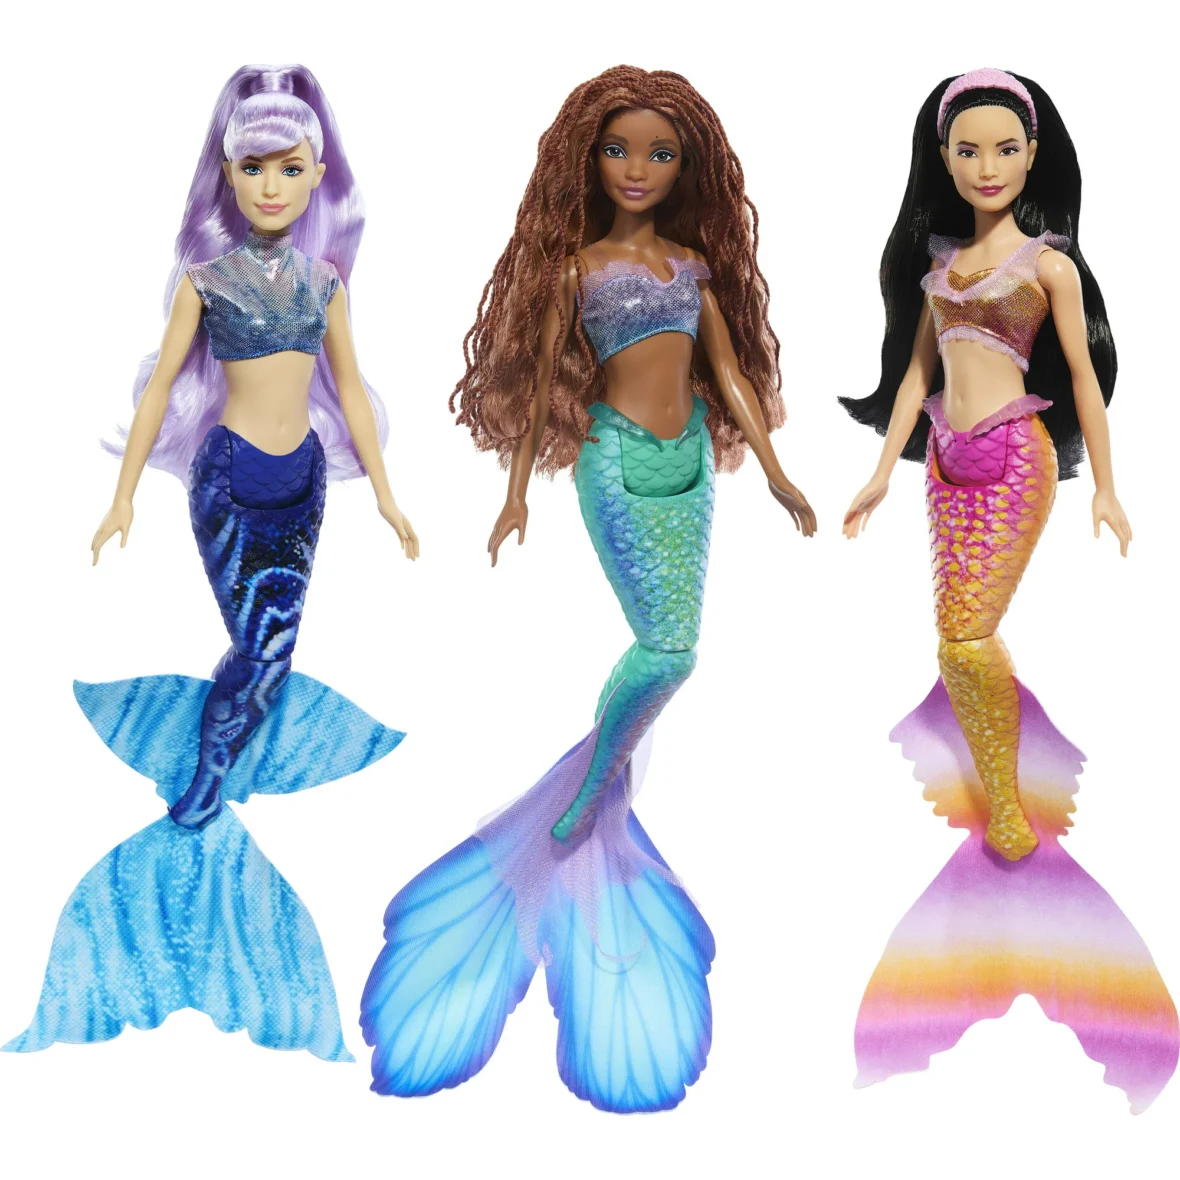 Disney The Little Mermaid Ariel and Sisters Doll Set with 3 Fashion Mermaid Dolls